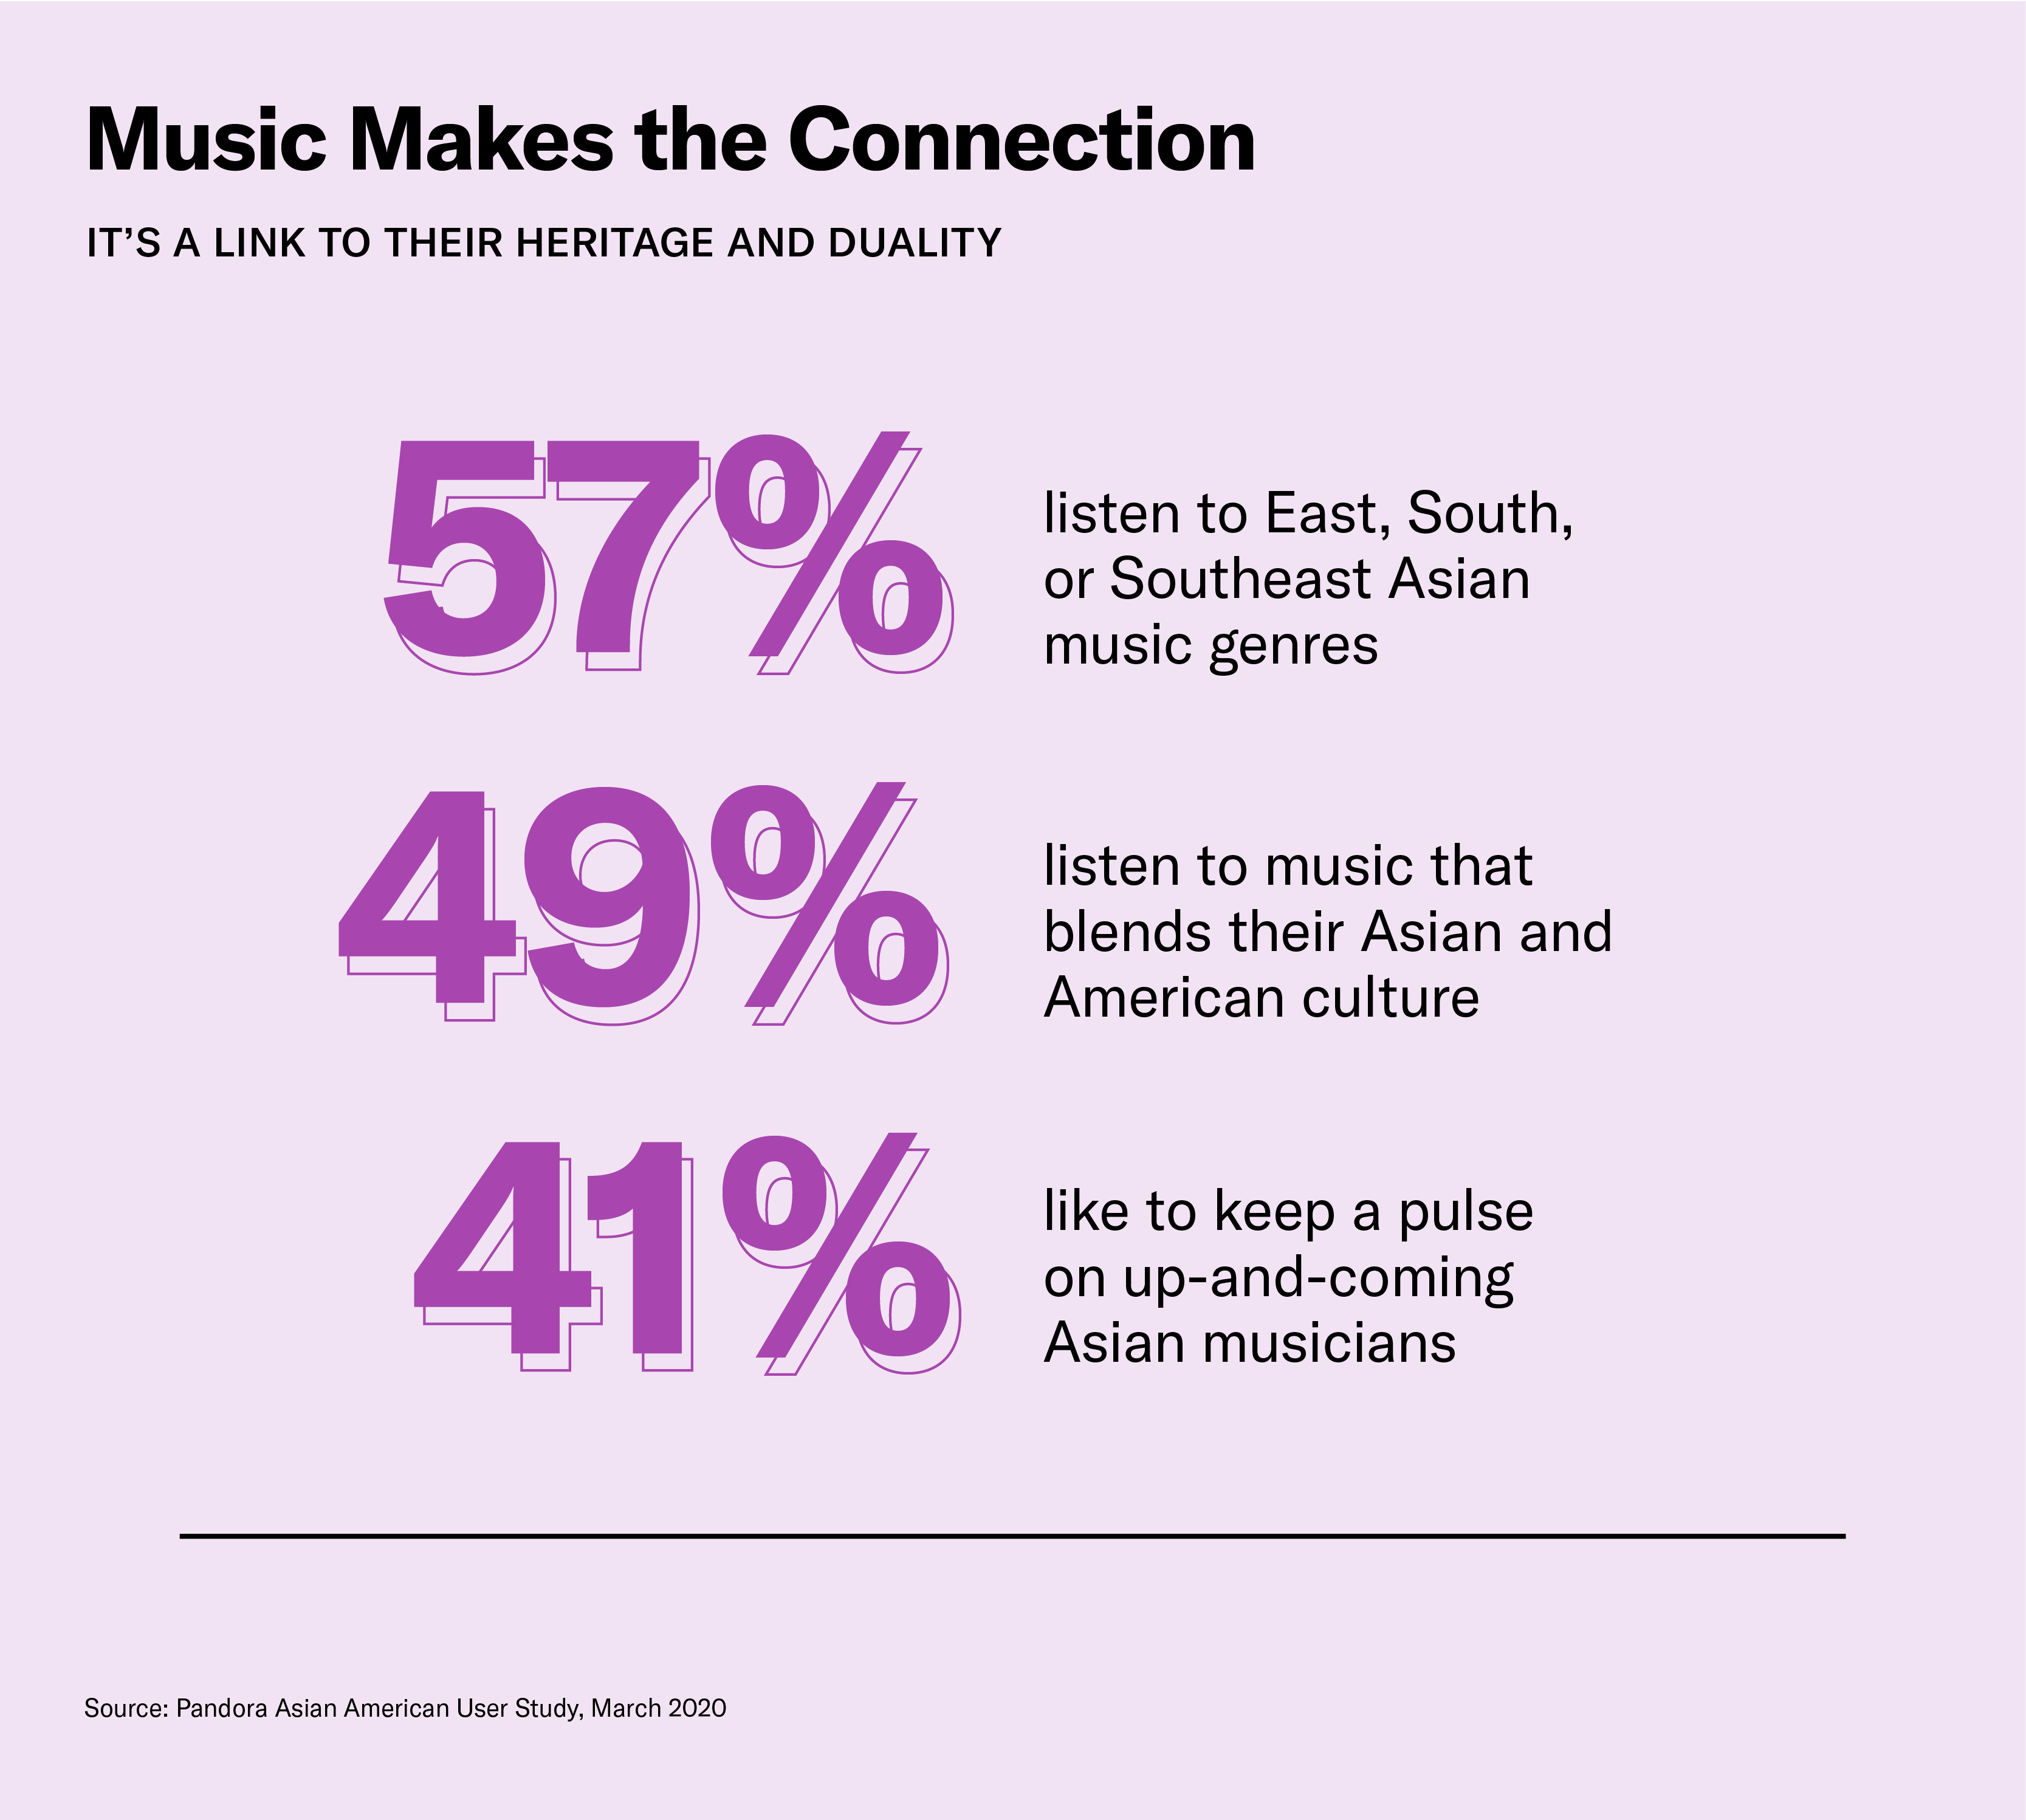 AAPI audiences connect with music